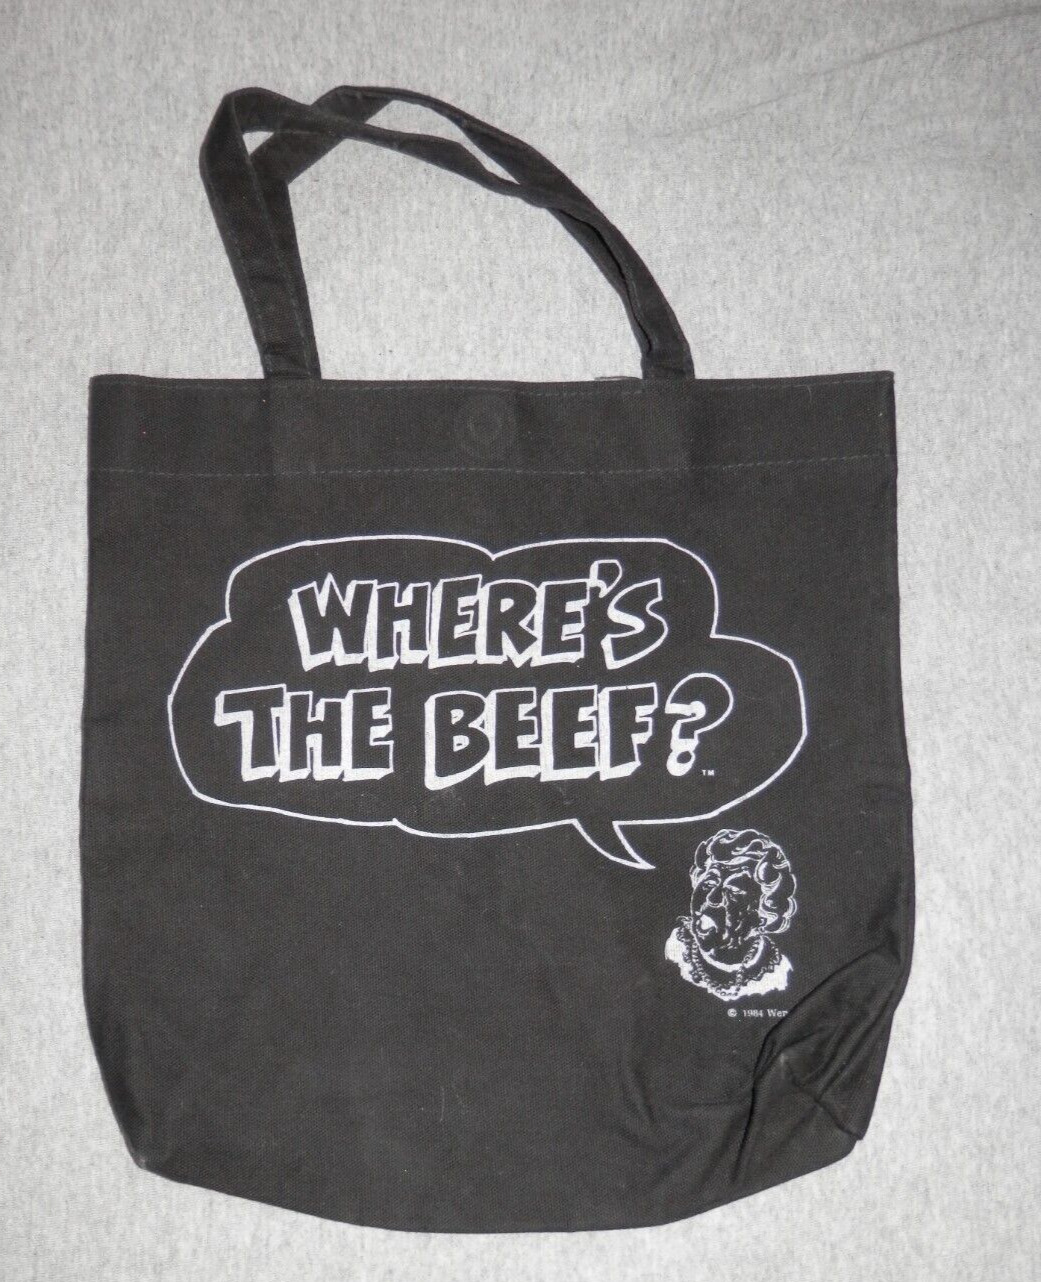 Vintage 1984 Wendys Where’s The Beef? Tote Bag - Black Canvas Plastic Lined 11\